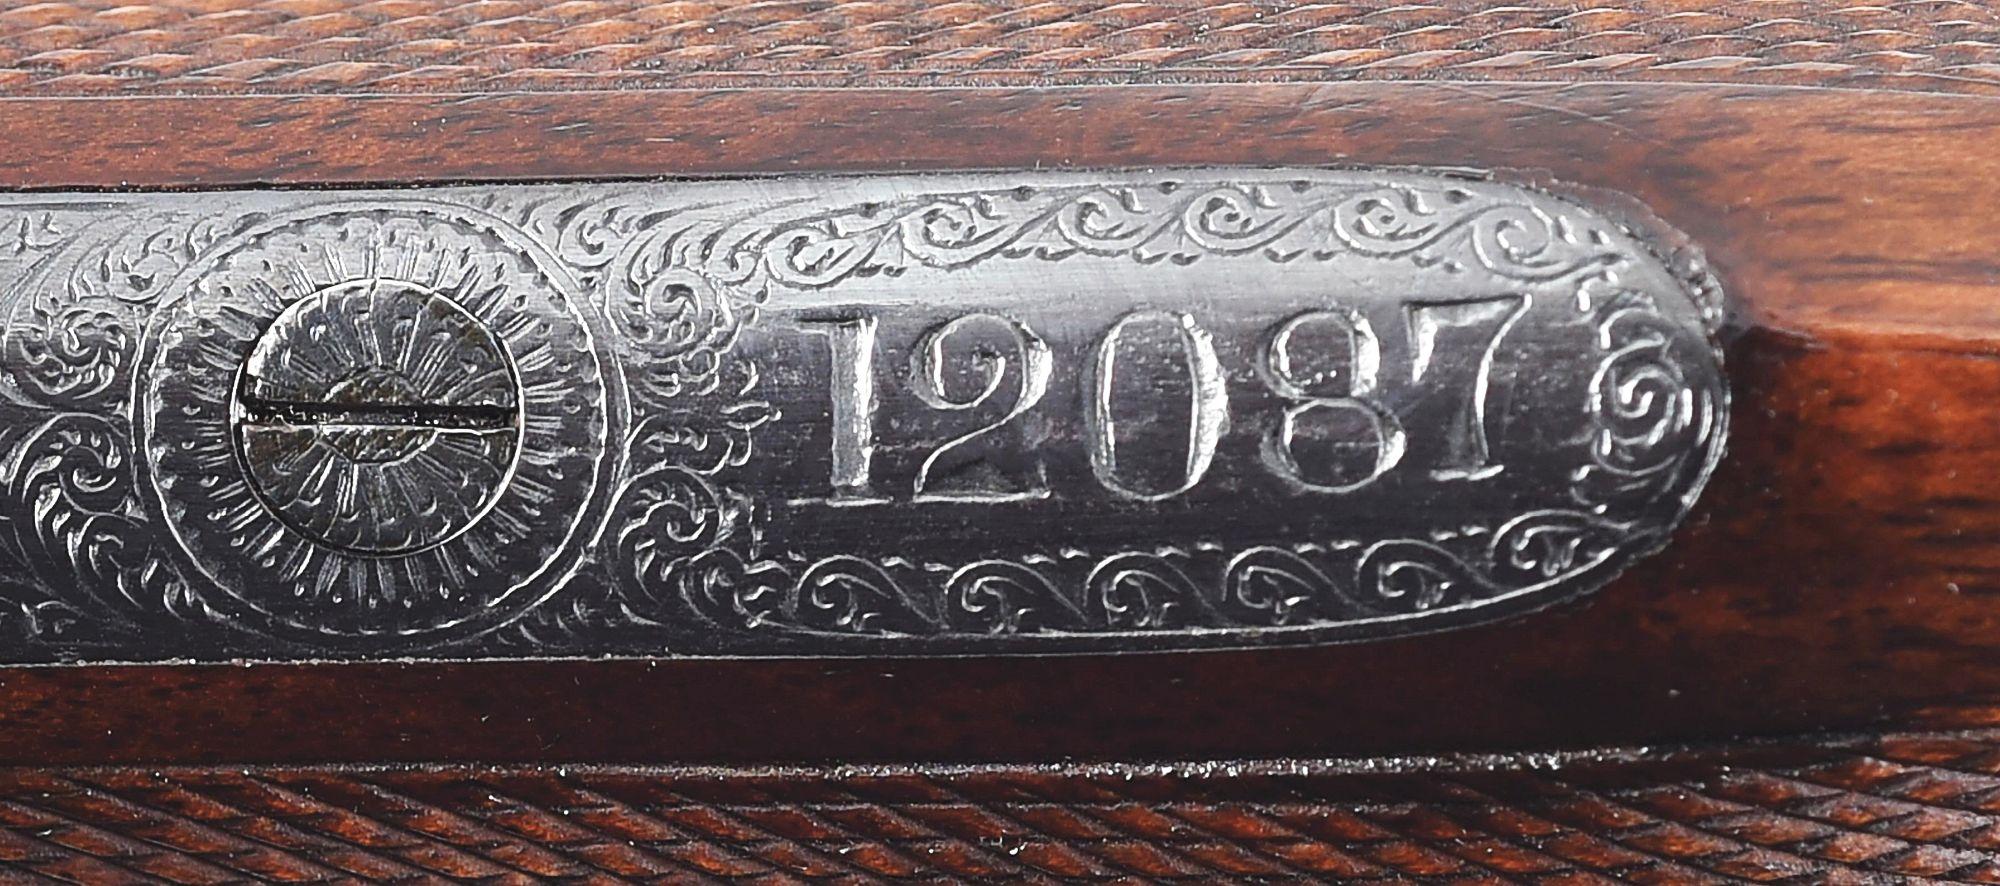 (C) CHARLES BOSWELL 12 GAUGE SIDE BY SIDE SHOTGUN WITH HAMMERS.